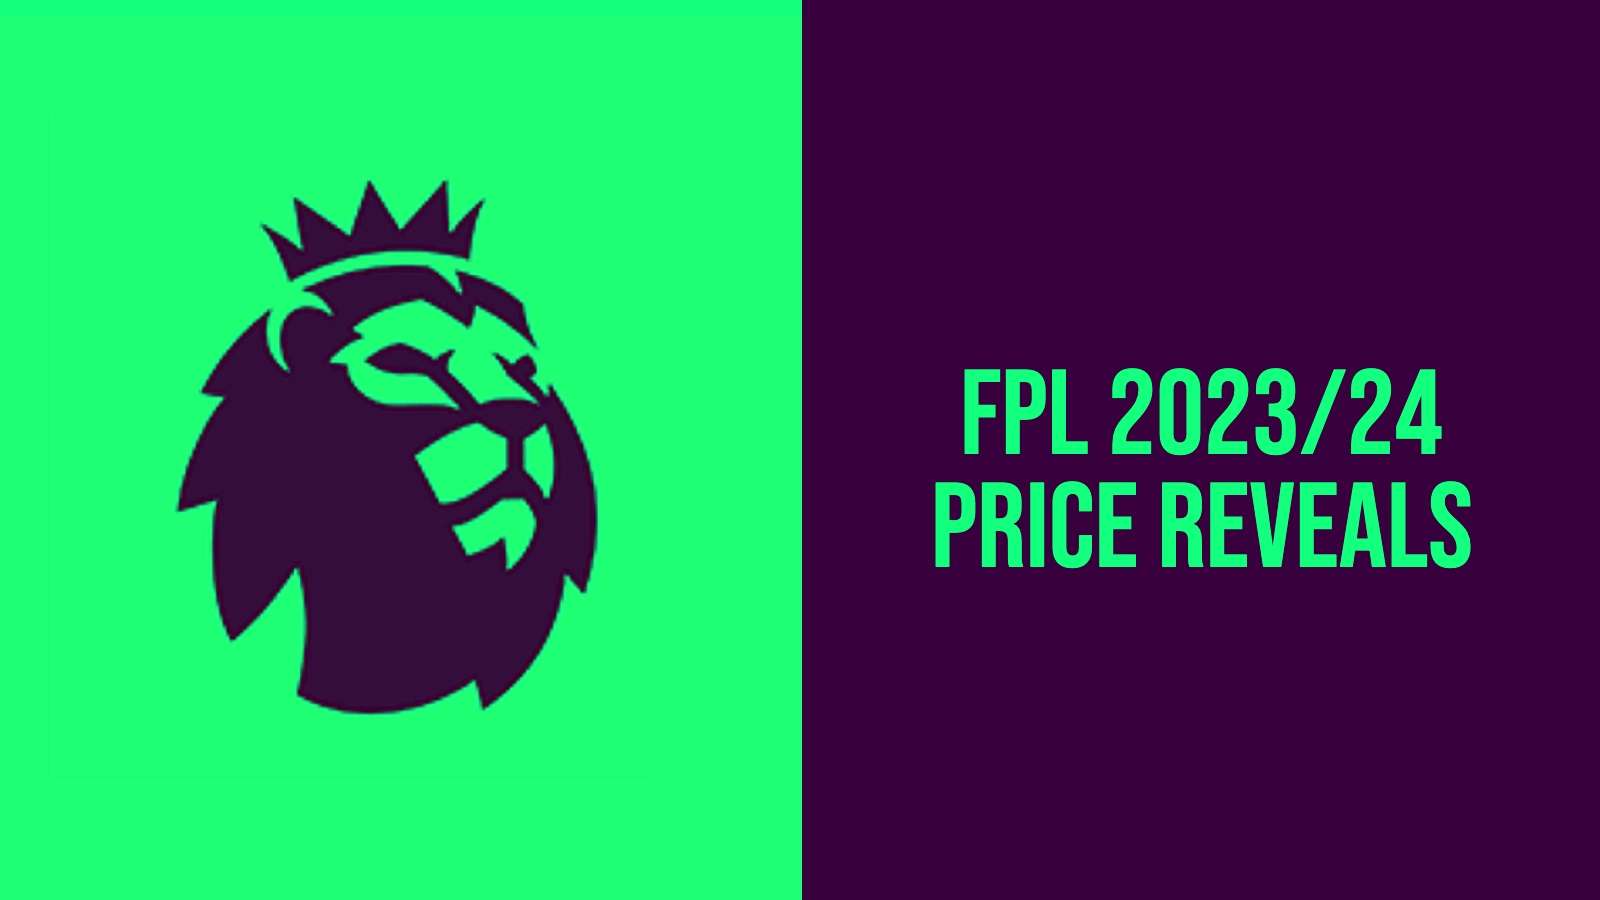 Fantasy premier League logo and colours with text saying 'FPL 2023/24 price reveals'